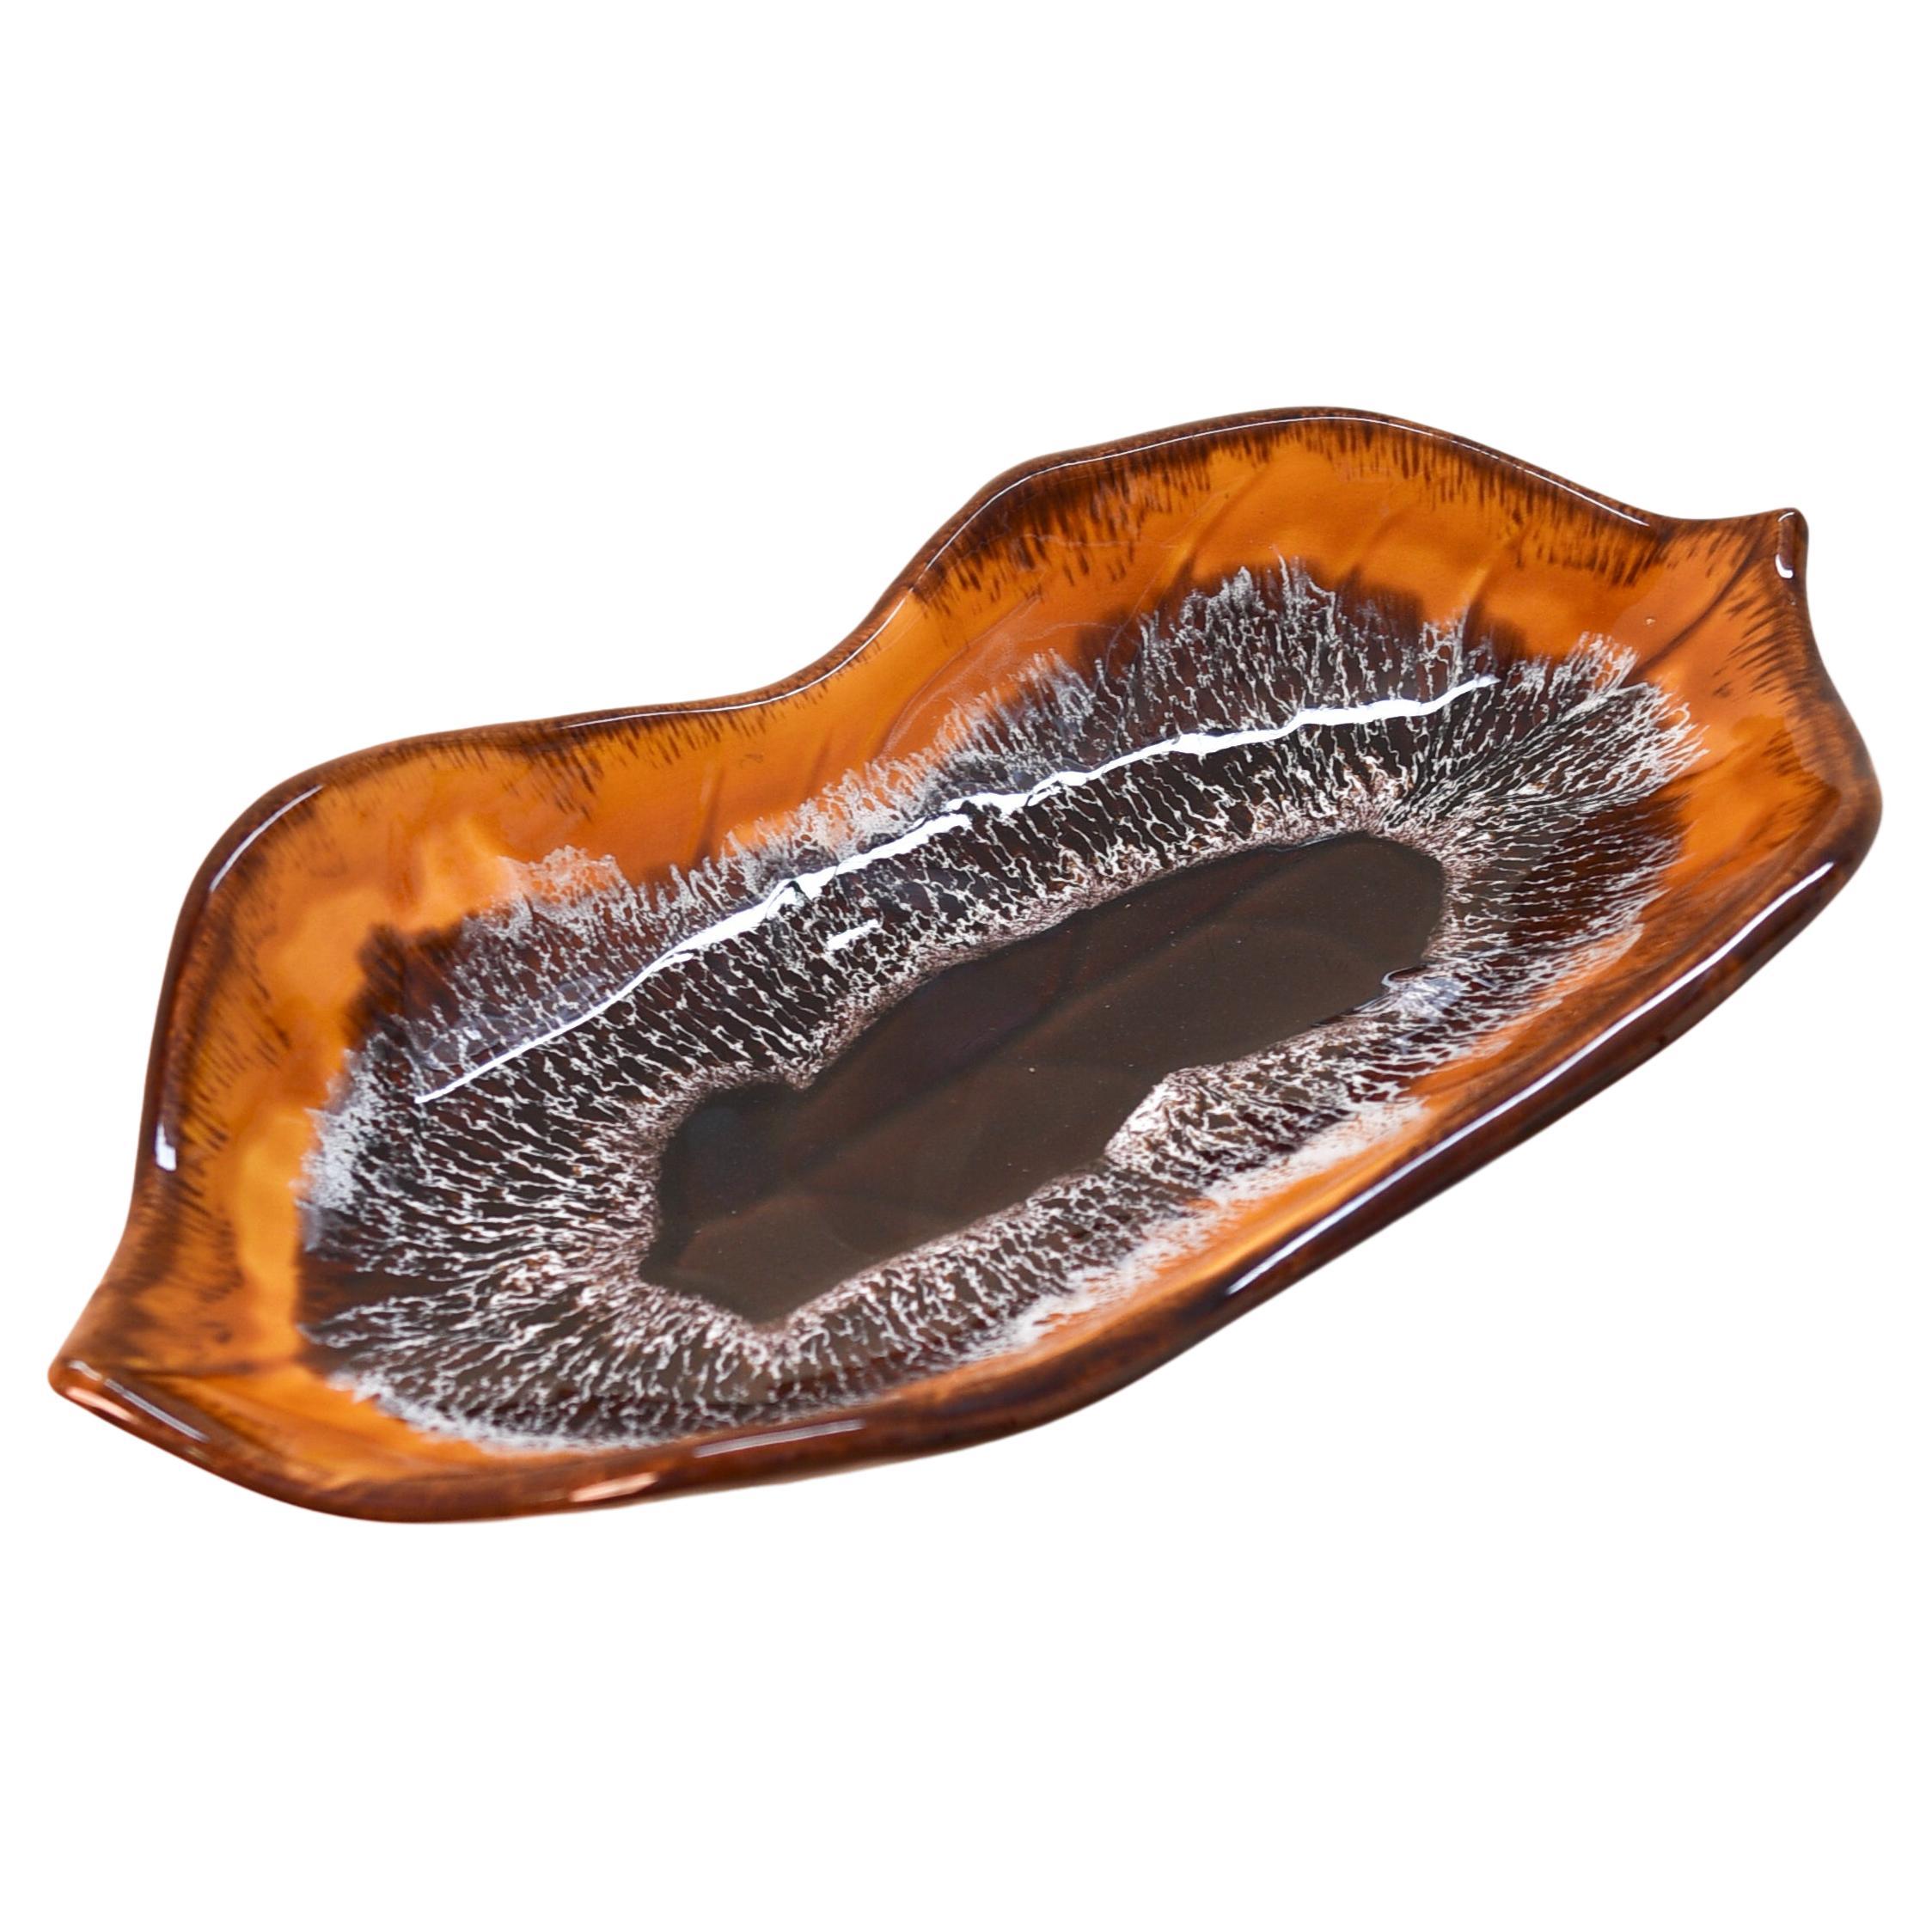 Ceramic tray in brown and orange, made by Vallauris (France) For Sale